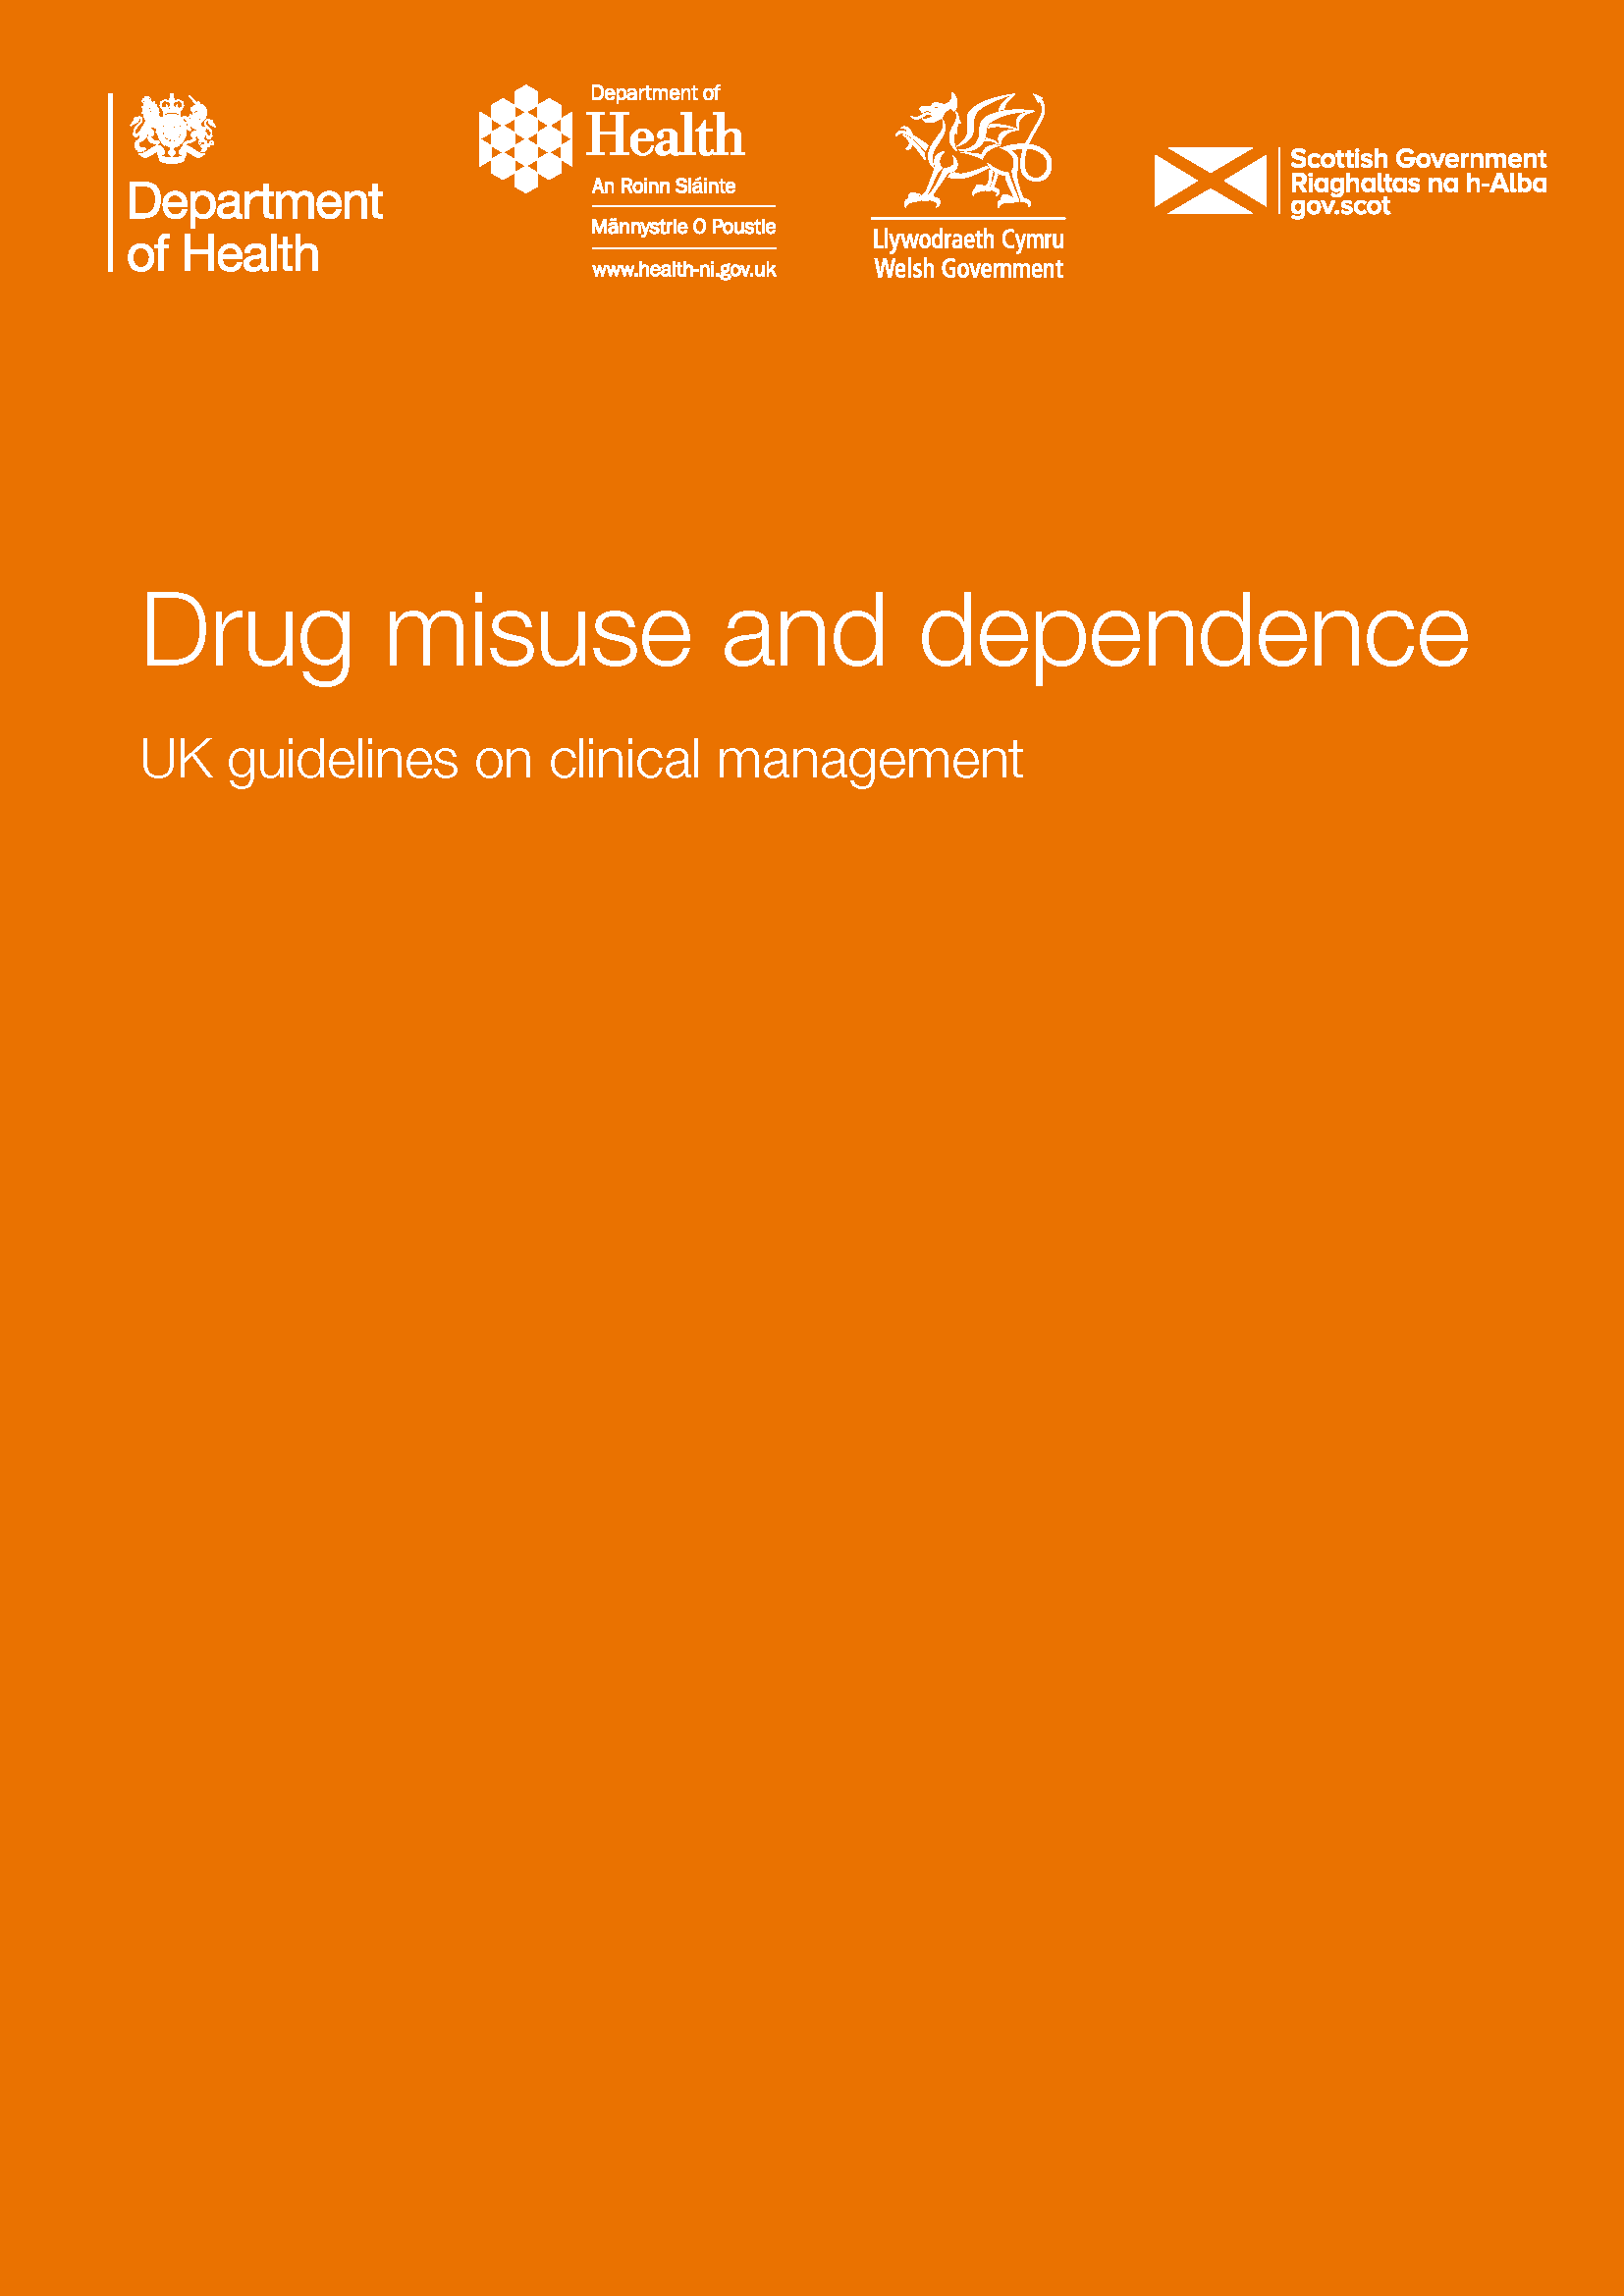 Drug misuse and dependence: UK guidelines on clinical management: Report cover: click to download report